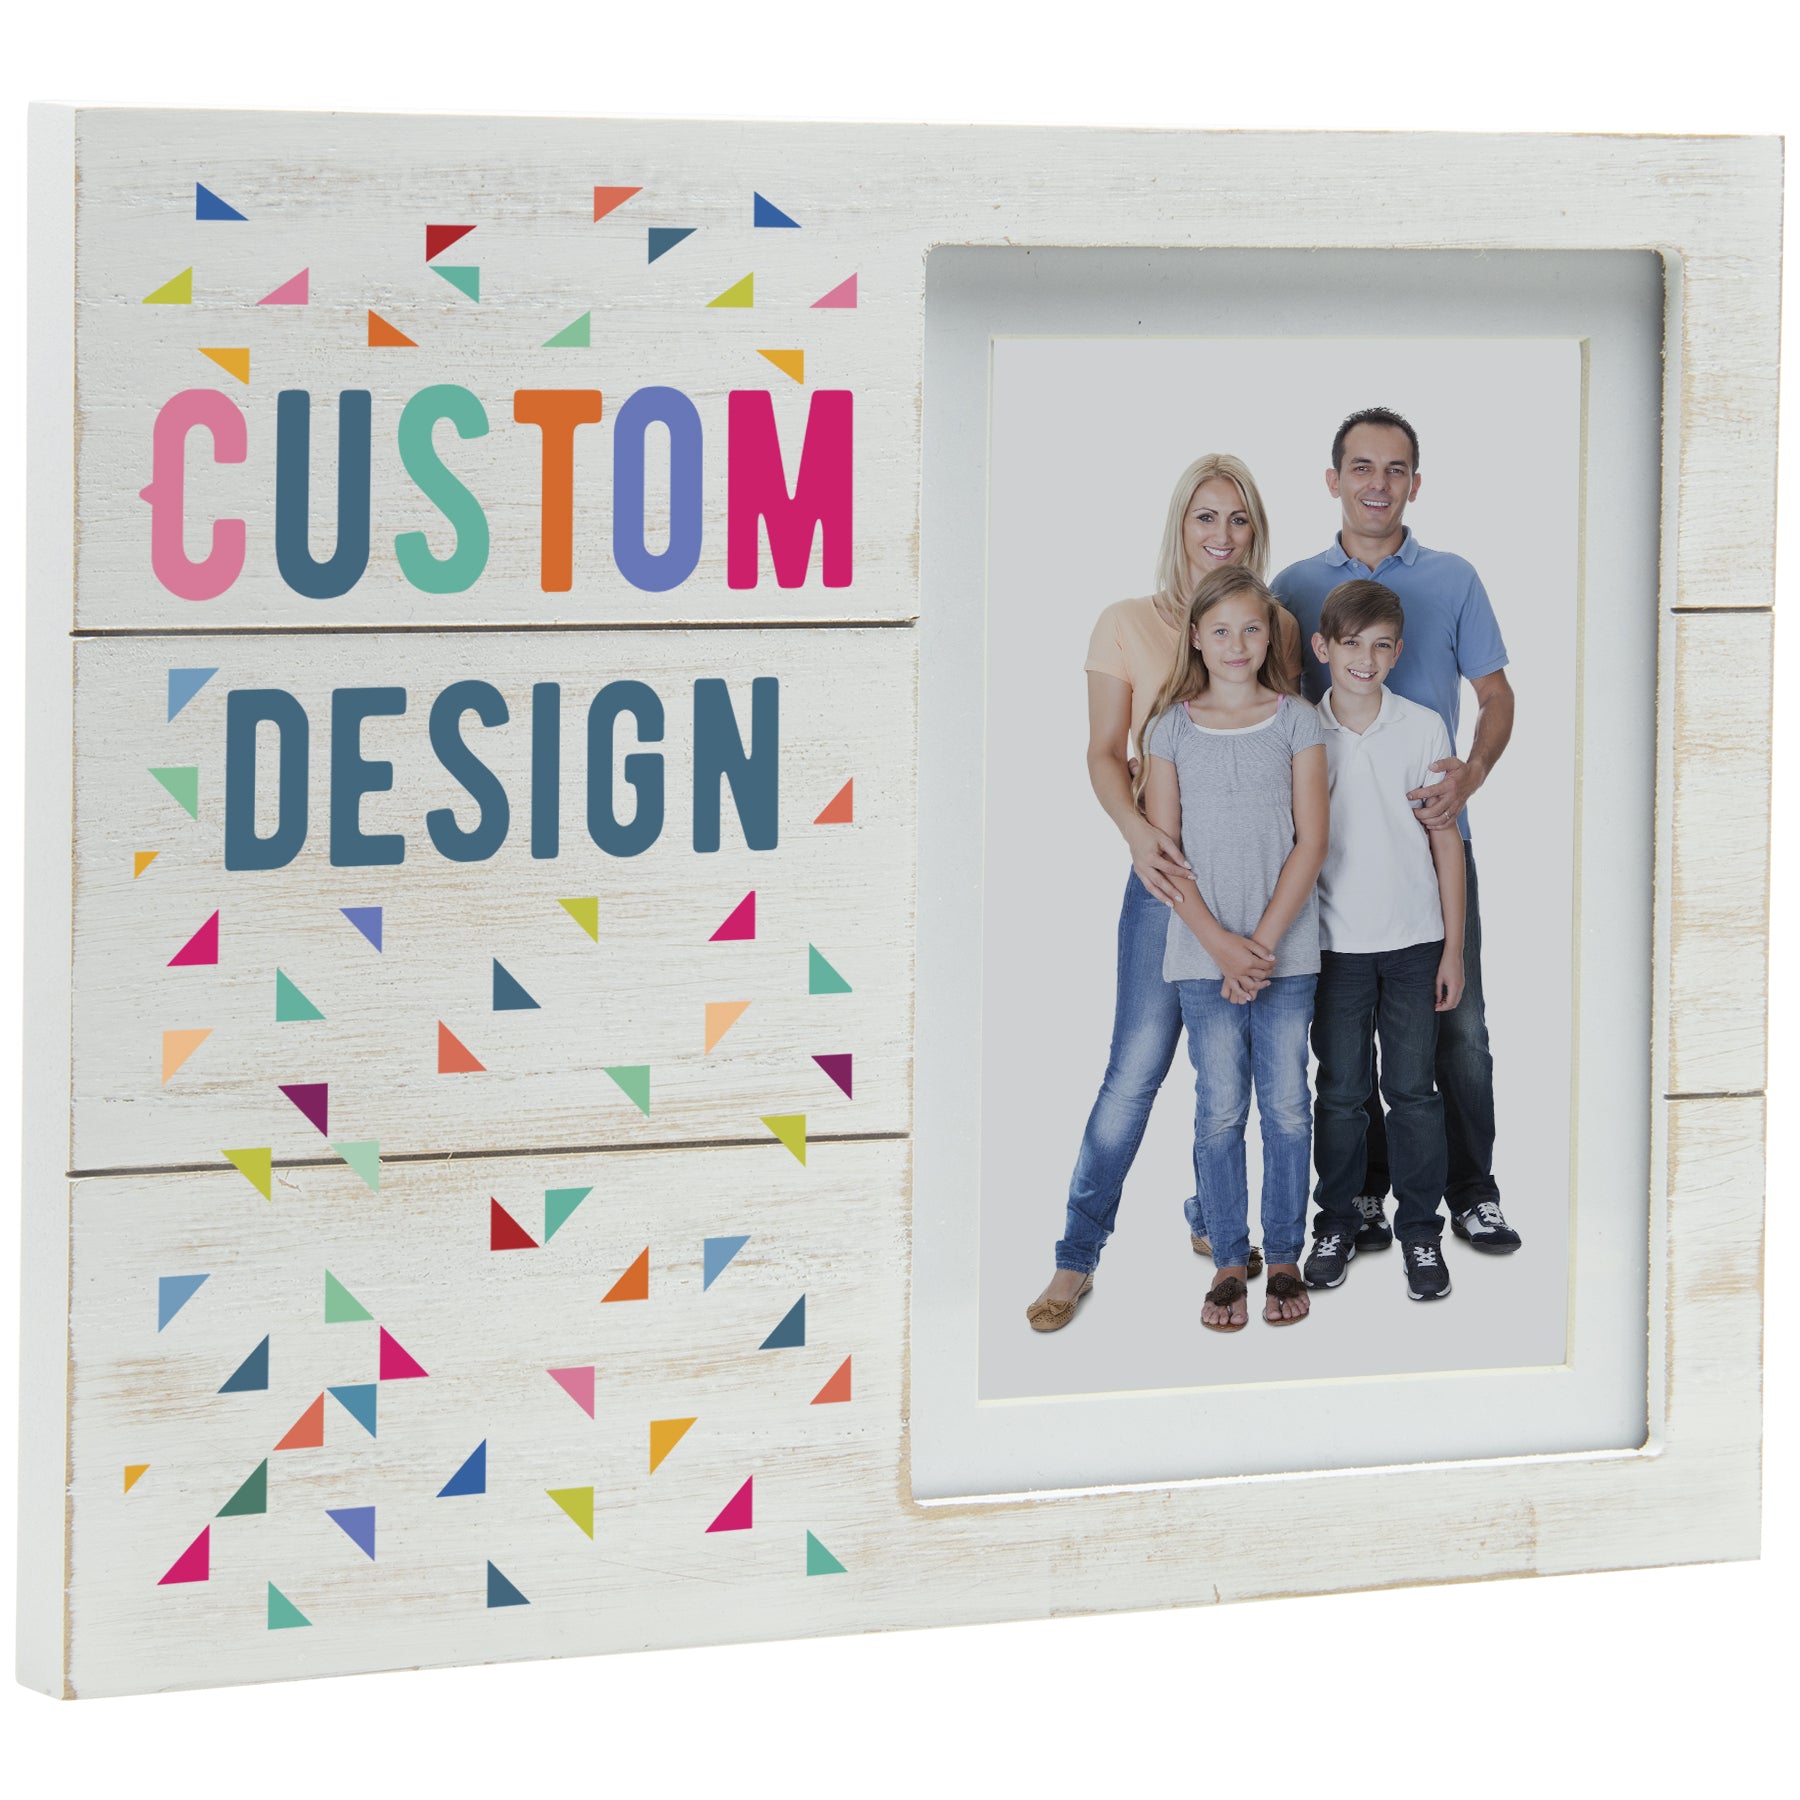 Custom Vertical Distressed Wood Picture Frame - 4x6 or 5x7 Photos